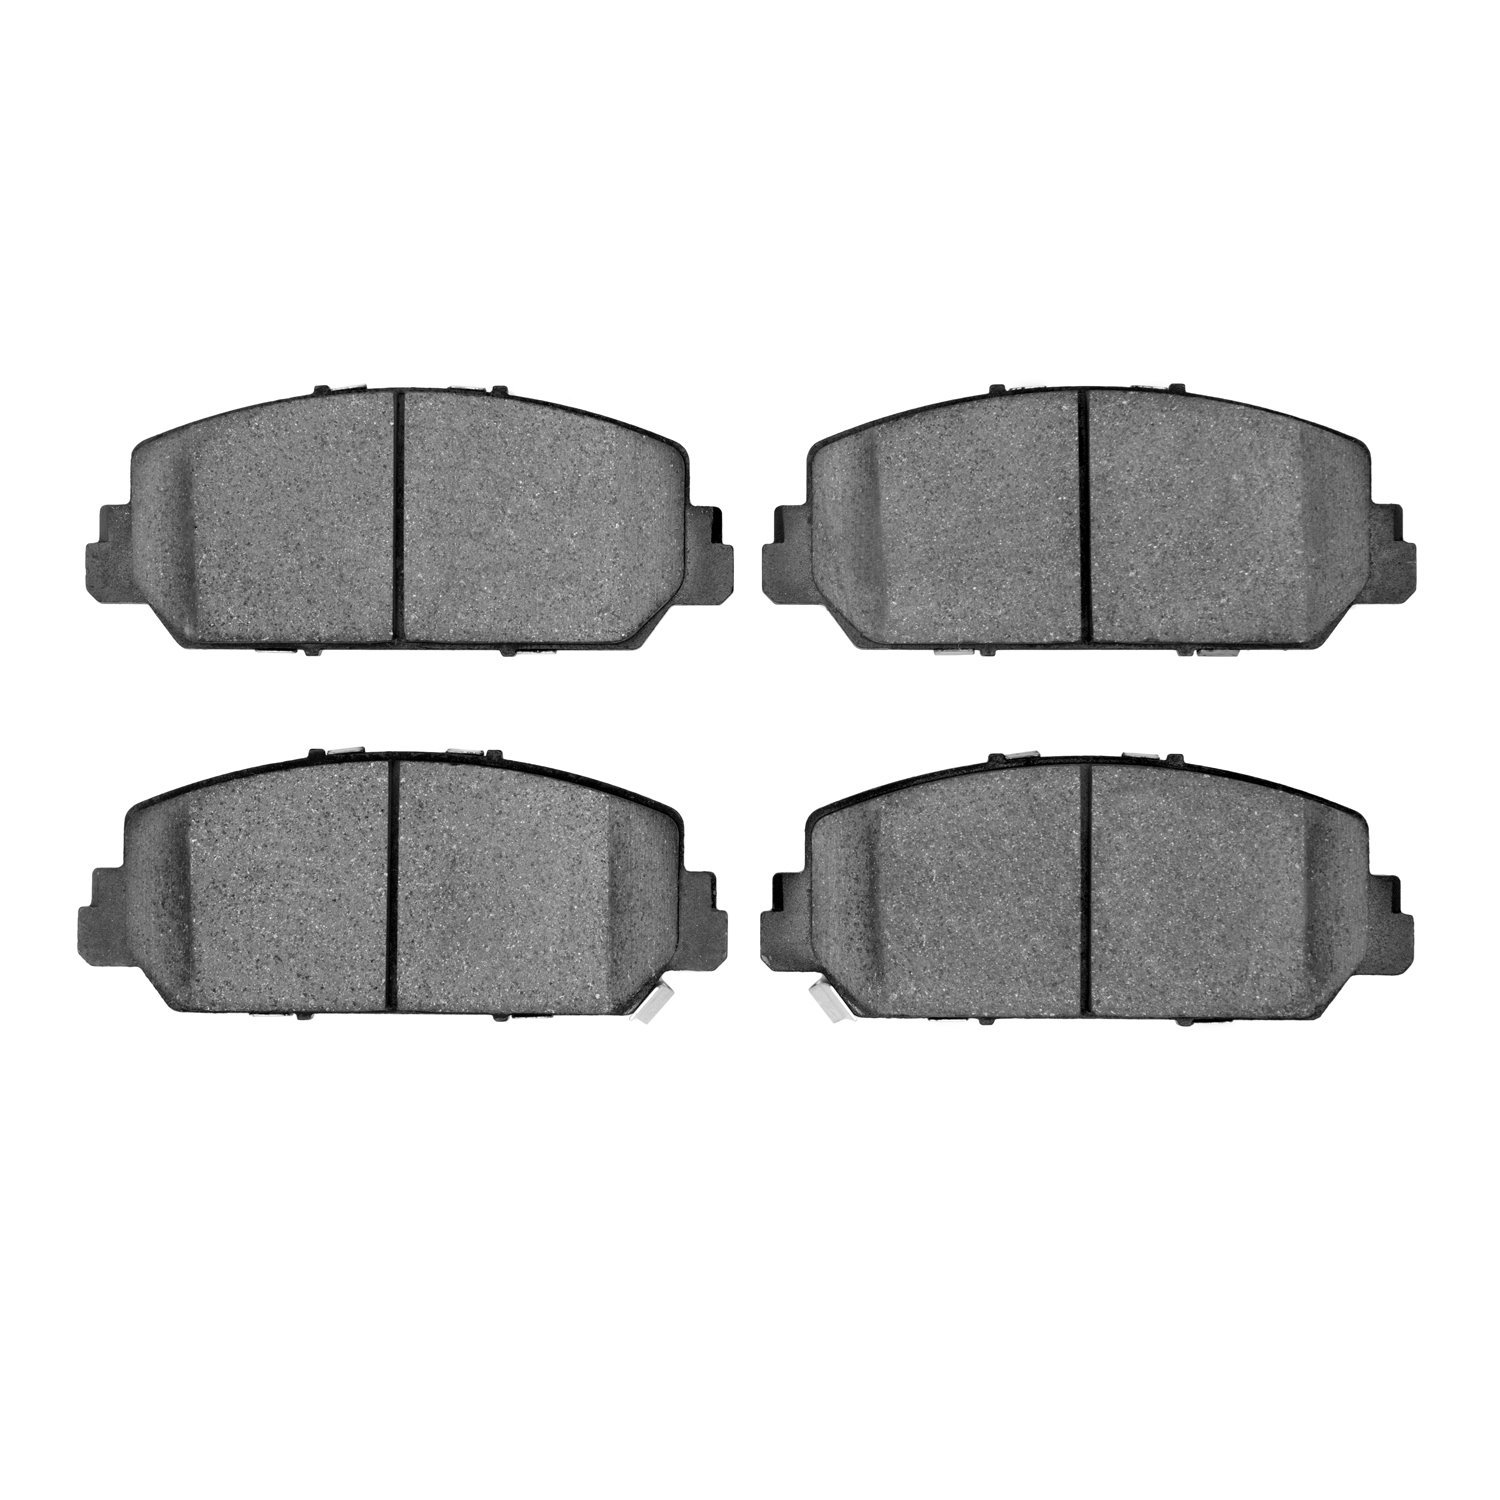 1310-1697-00 3000-Series Ceramic Brake Pads, Fits Select Acura/Honda, Position: Front